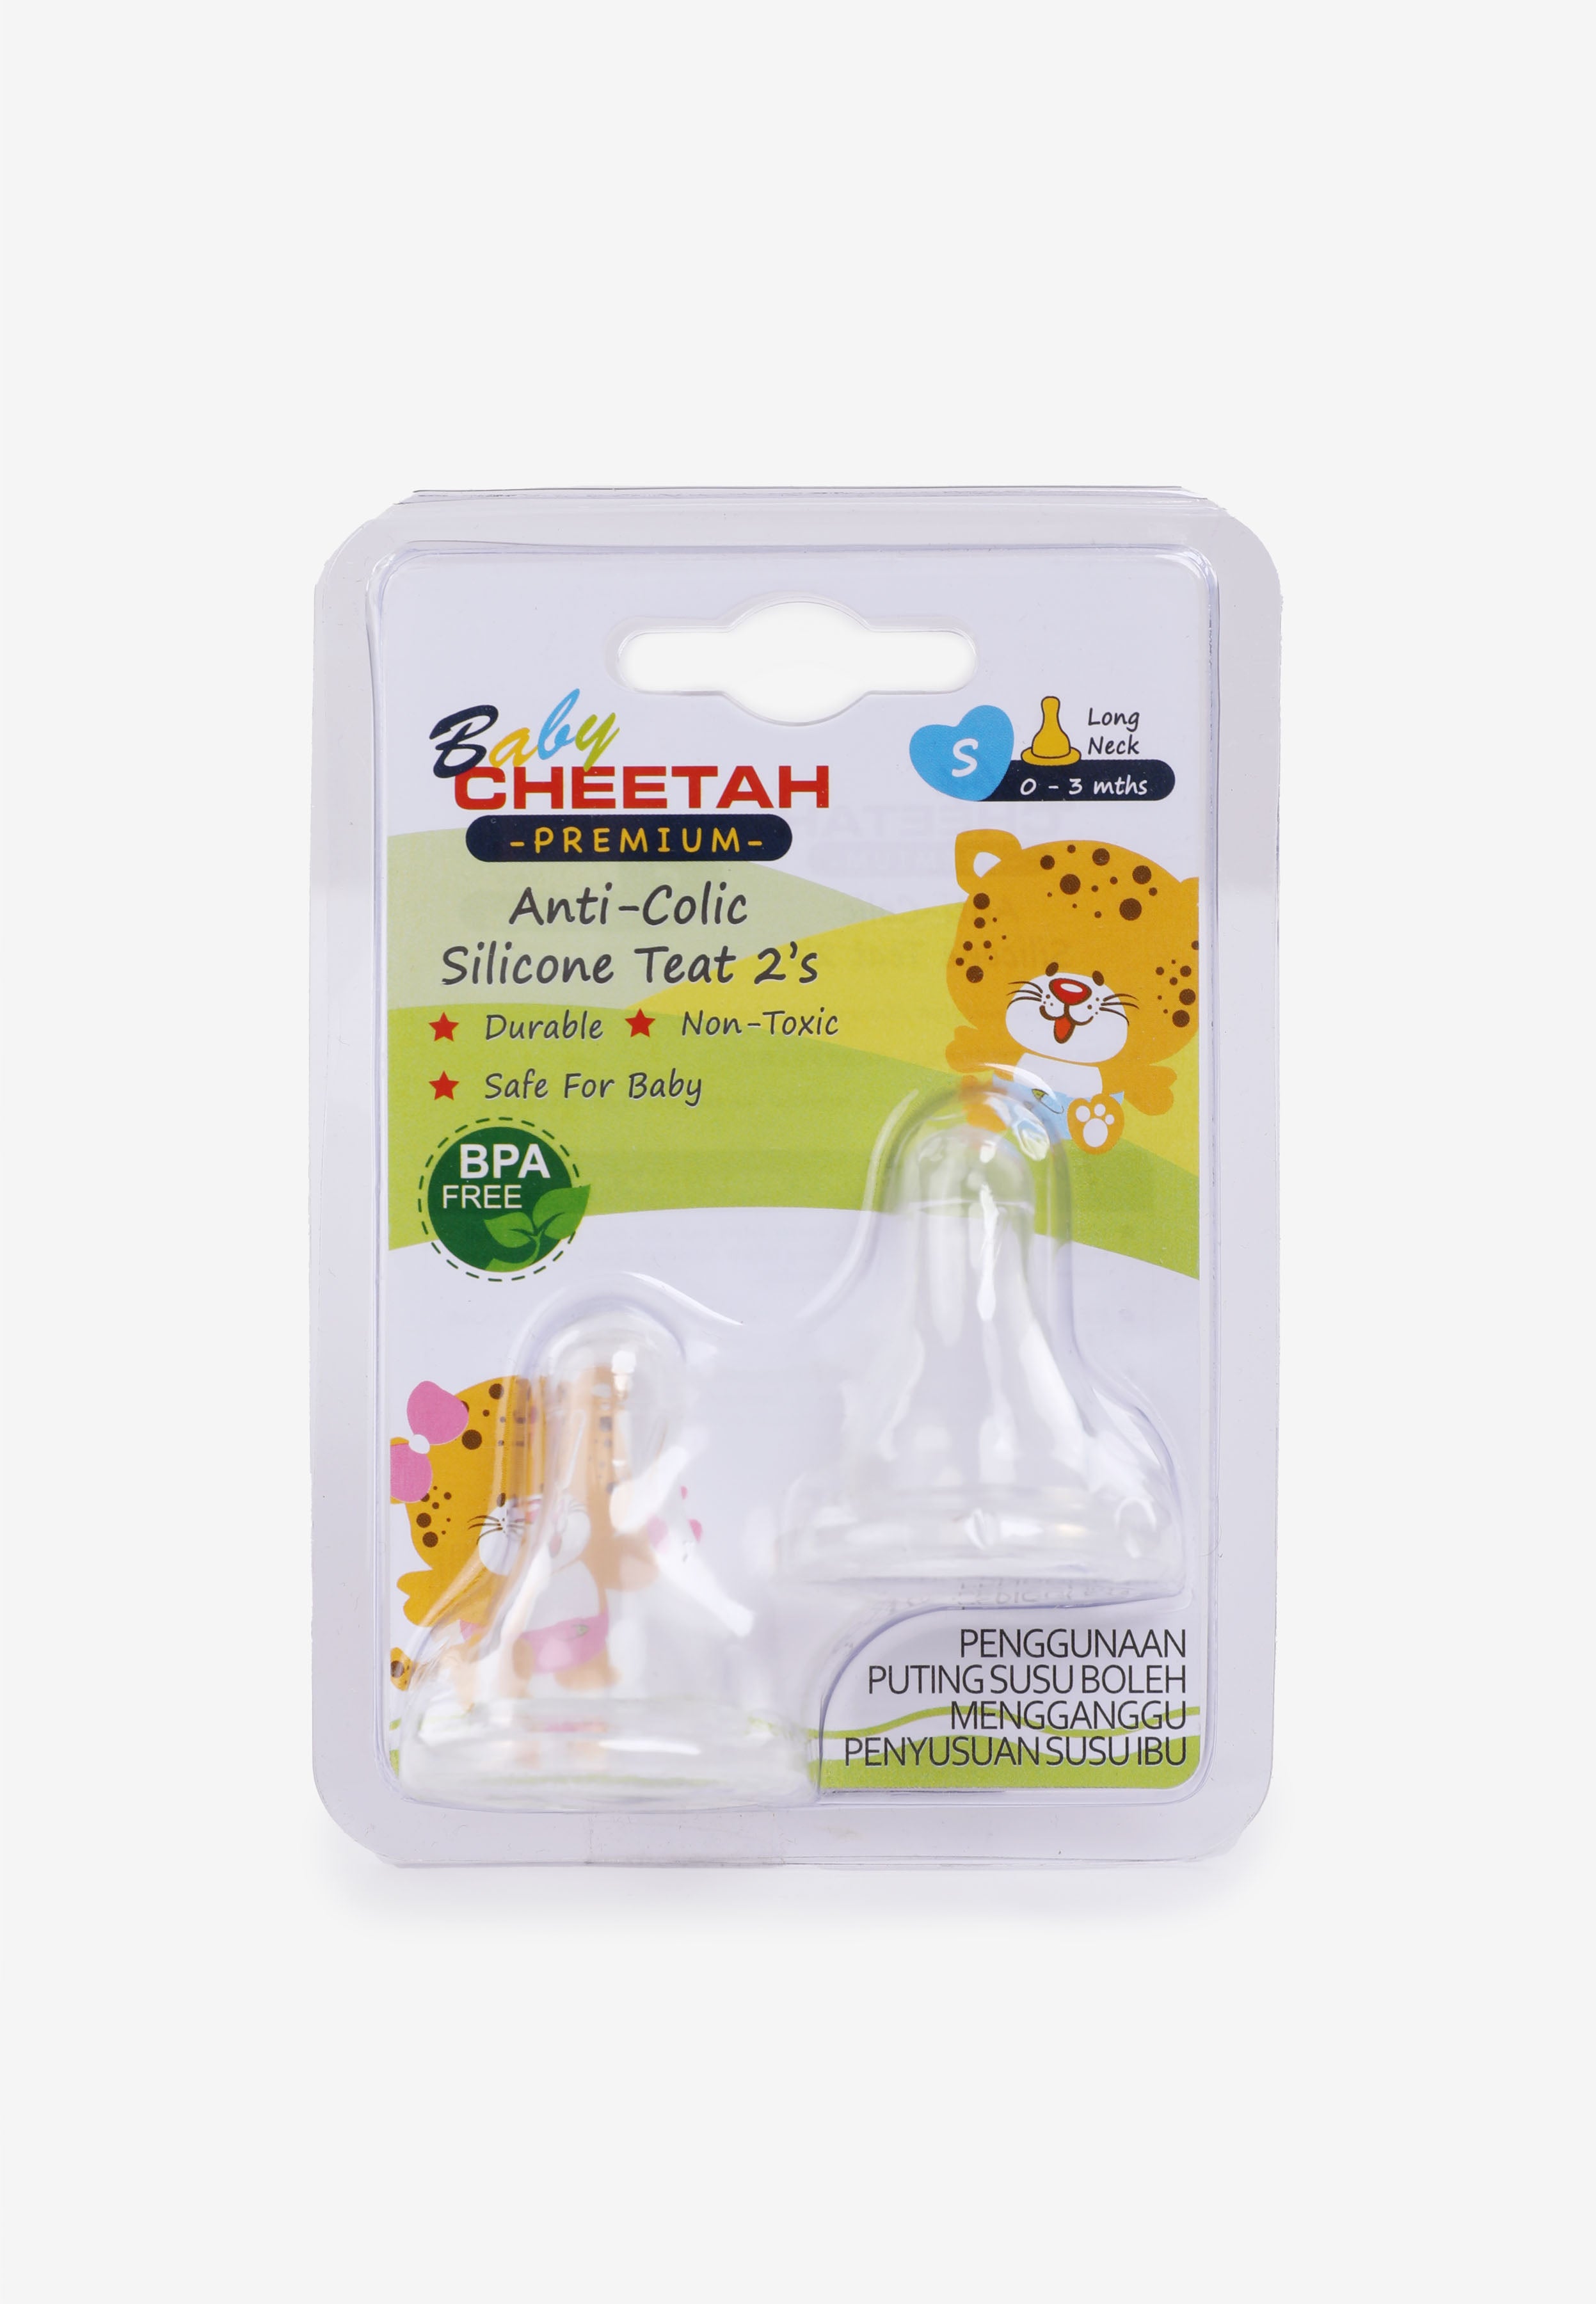 Baby Cheetah Anti-Colic Silicone Teats (2 in 1)- Long Neck (S) - CBB-NP21032